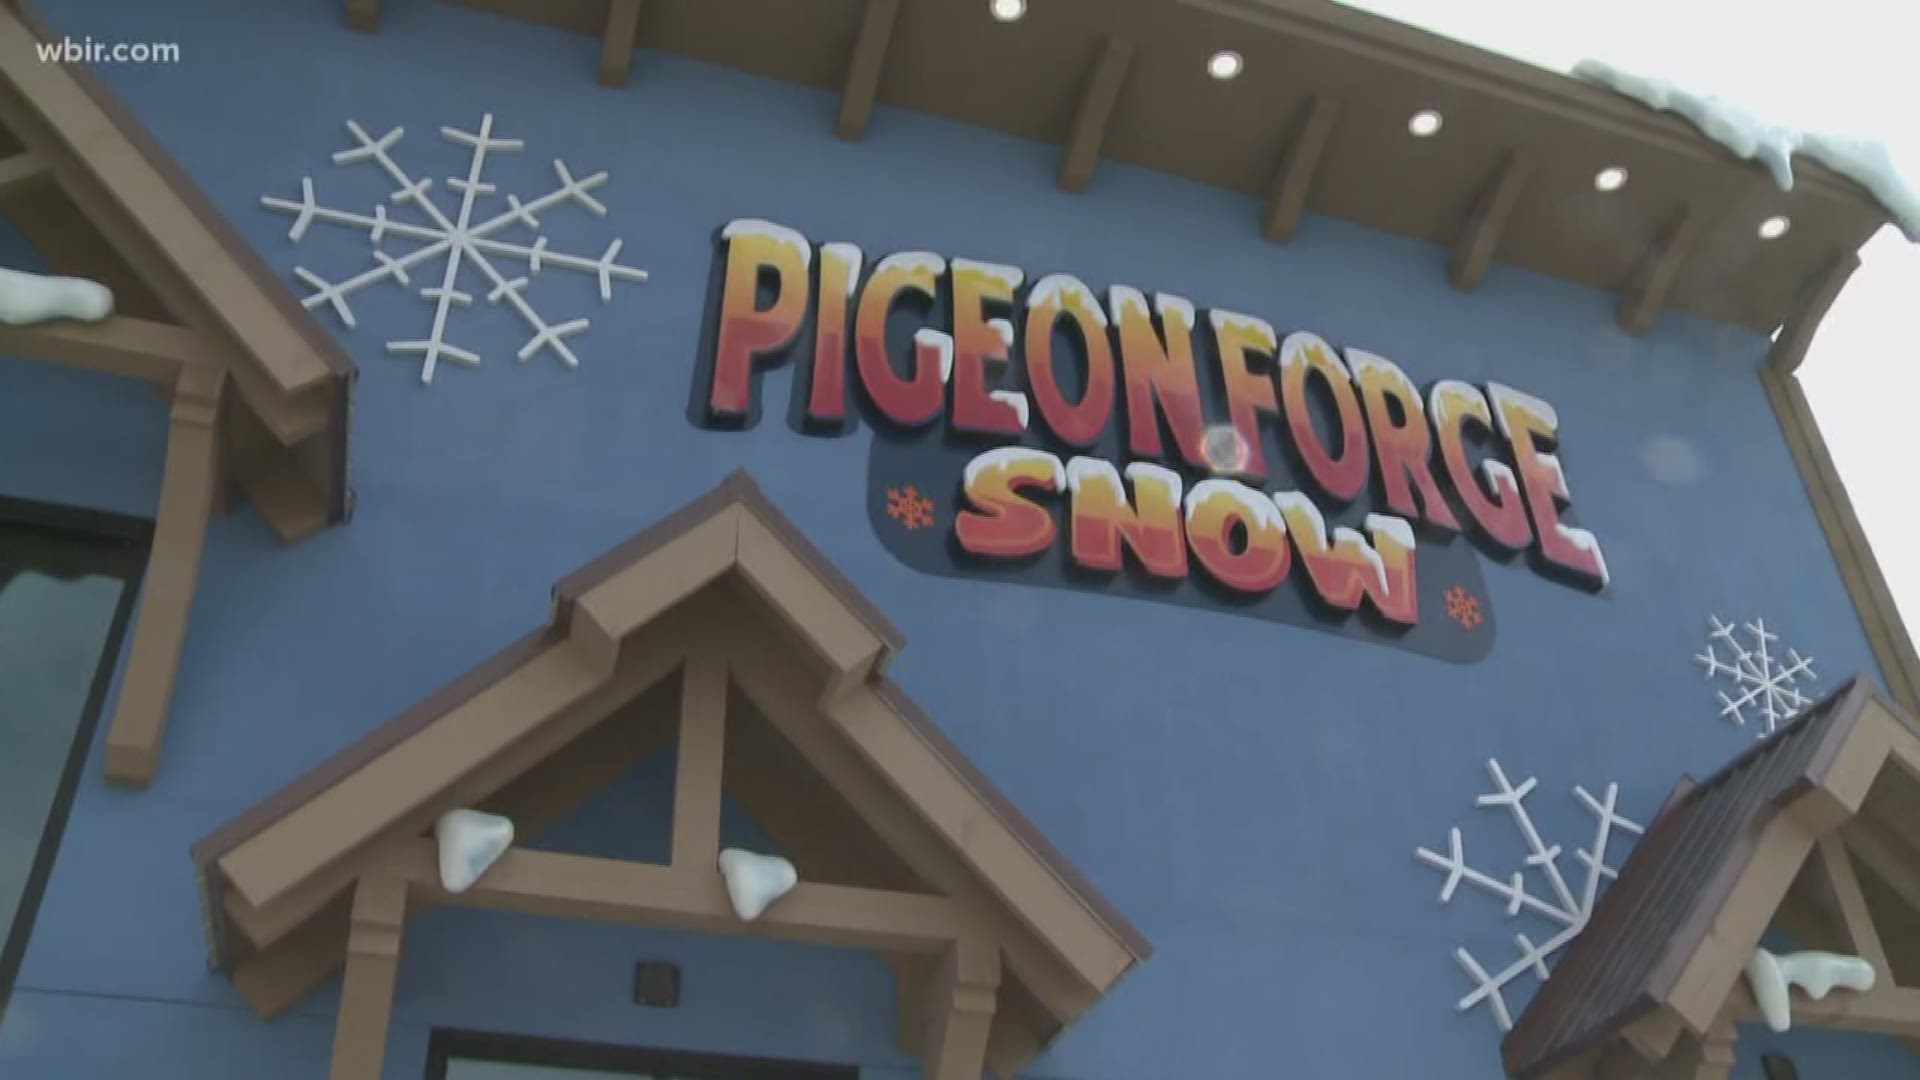 A look at the new Pigeon Forge Snow that's now open.March 23, 2018-4pm